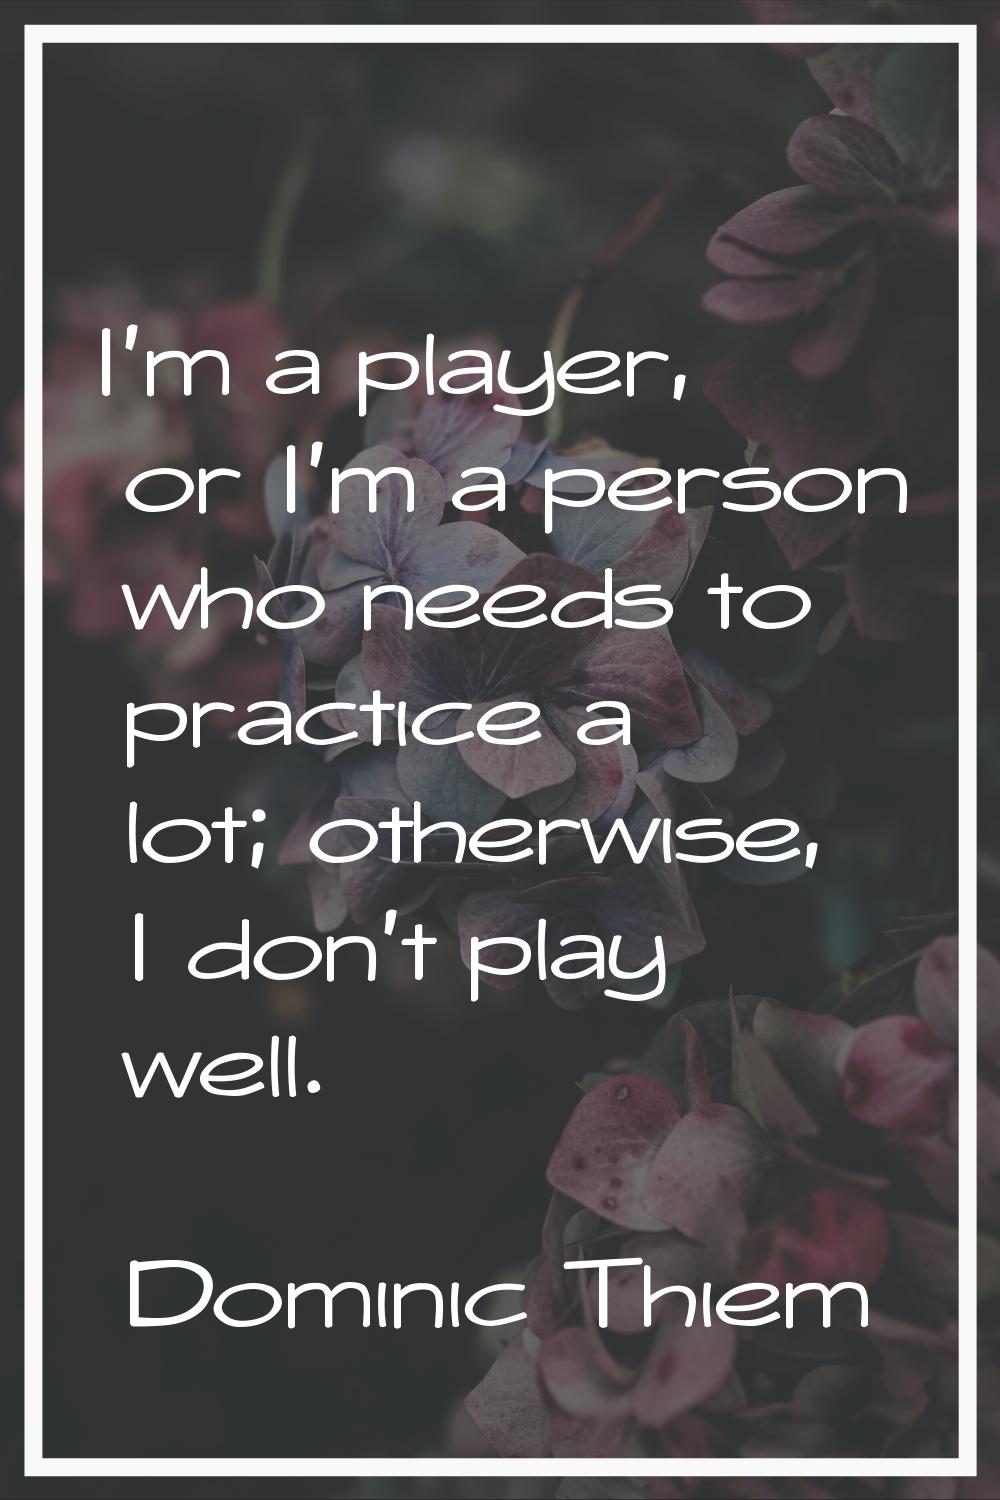 I'm a player, or I'm a person who needs to practice a lot; otherwise, I don't play well.